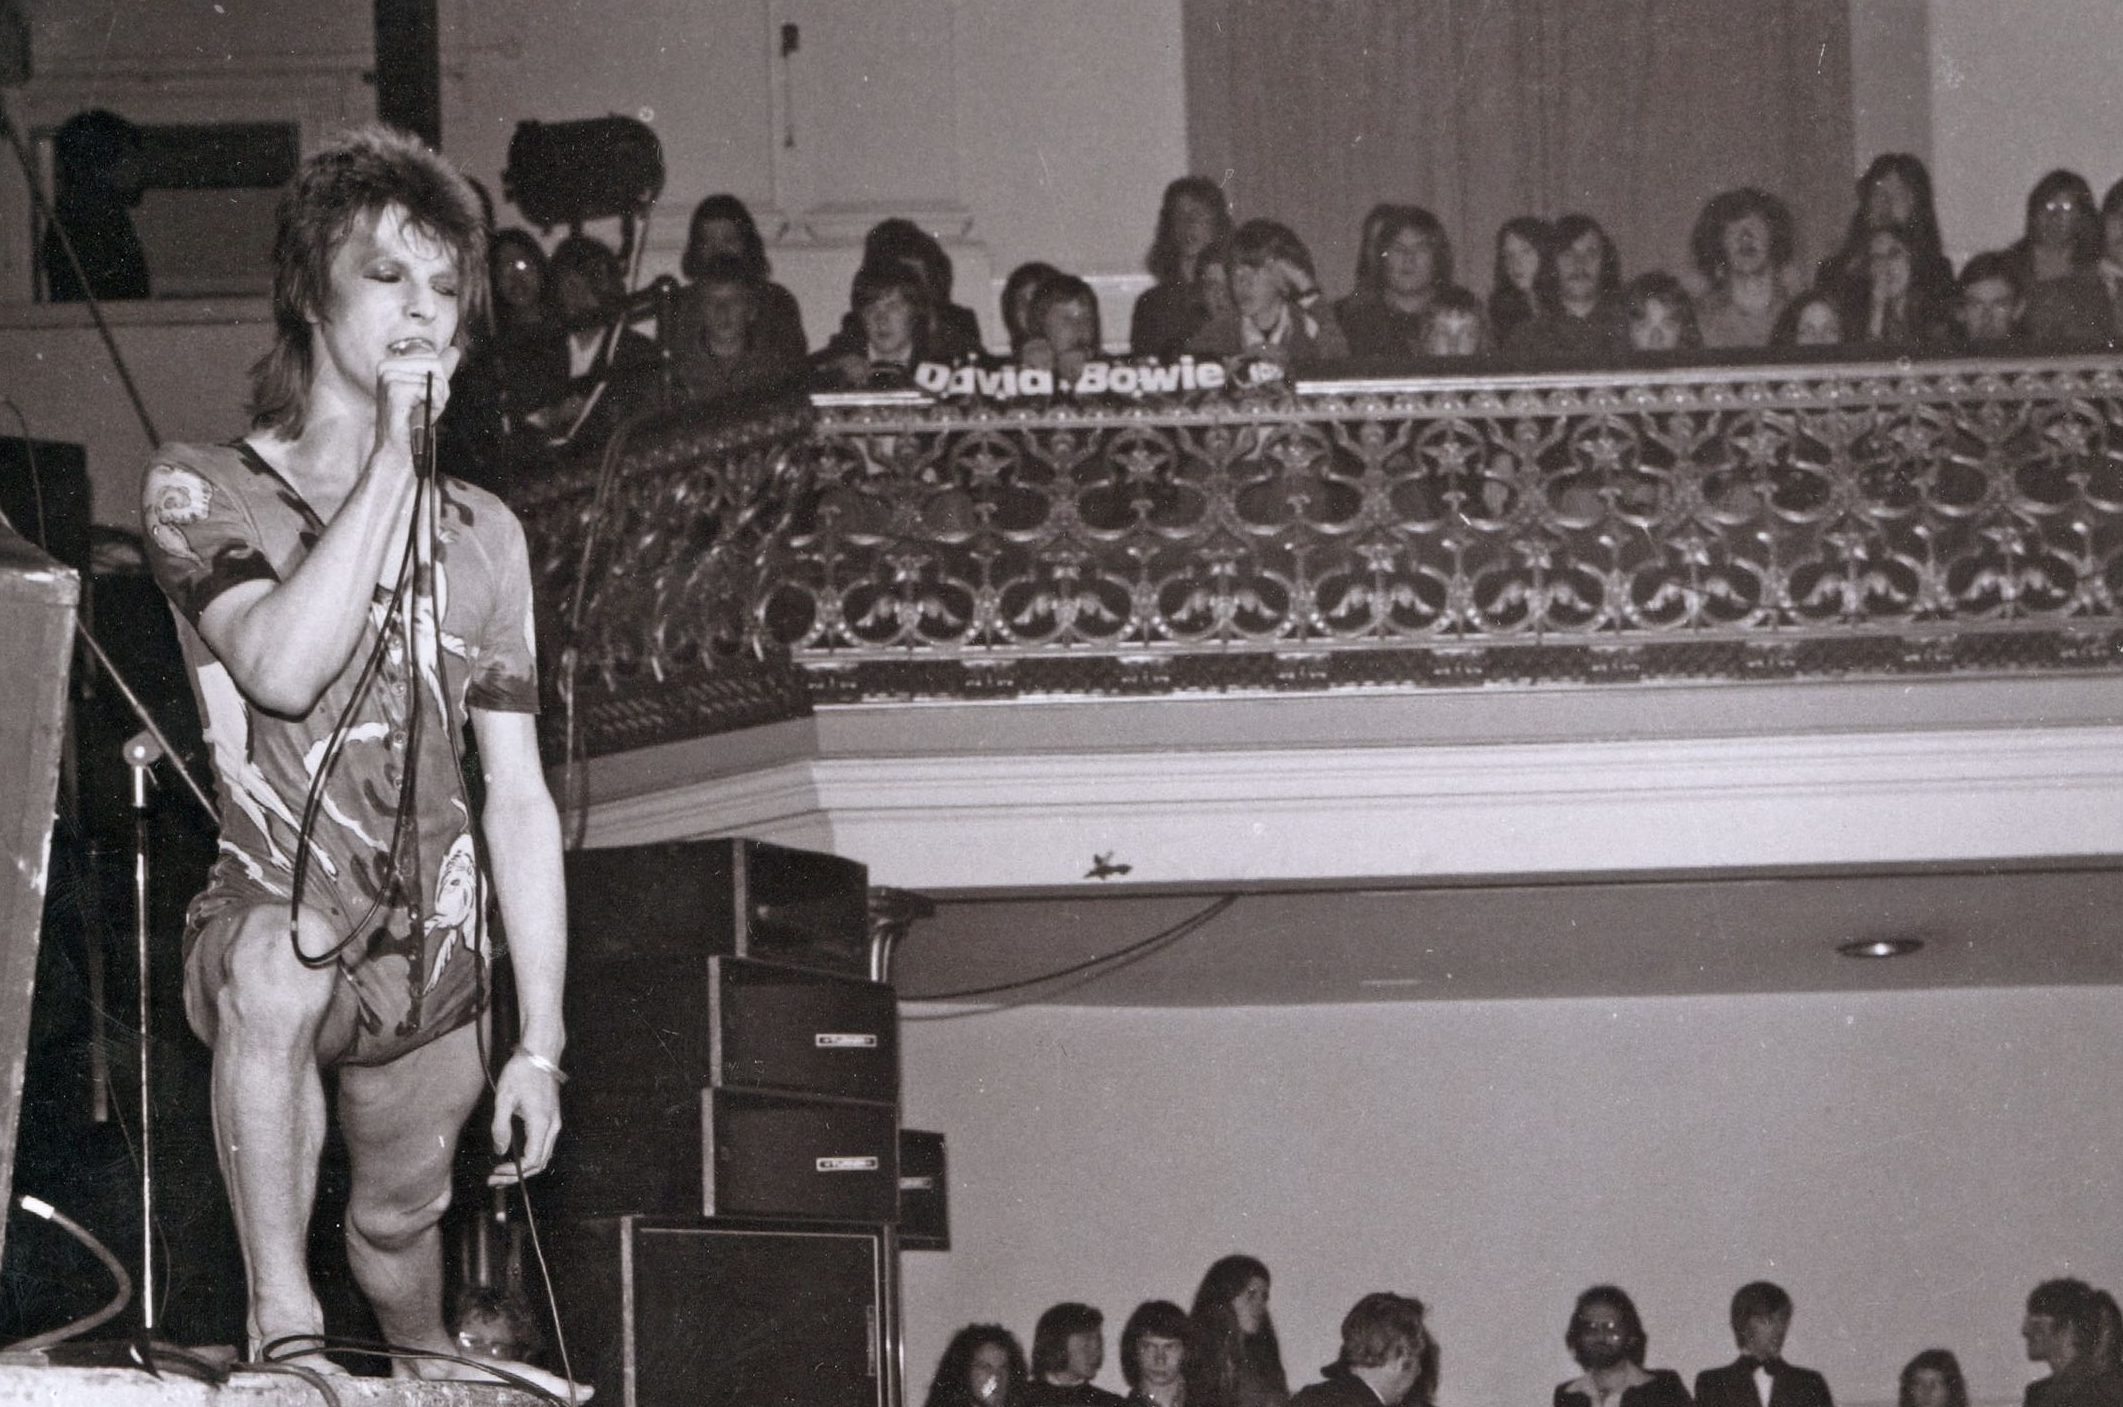 David Bowie in Ziggy Stardust guise at Aberdeen's Music Hall in 1973